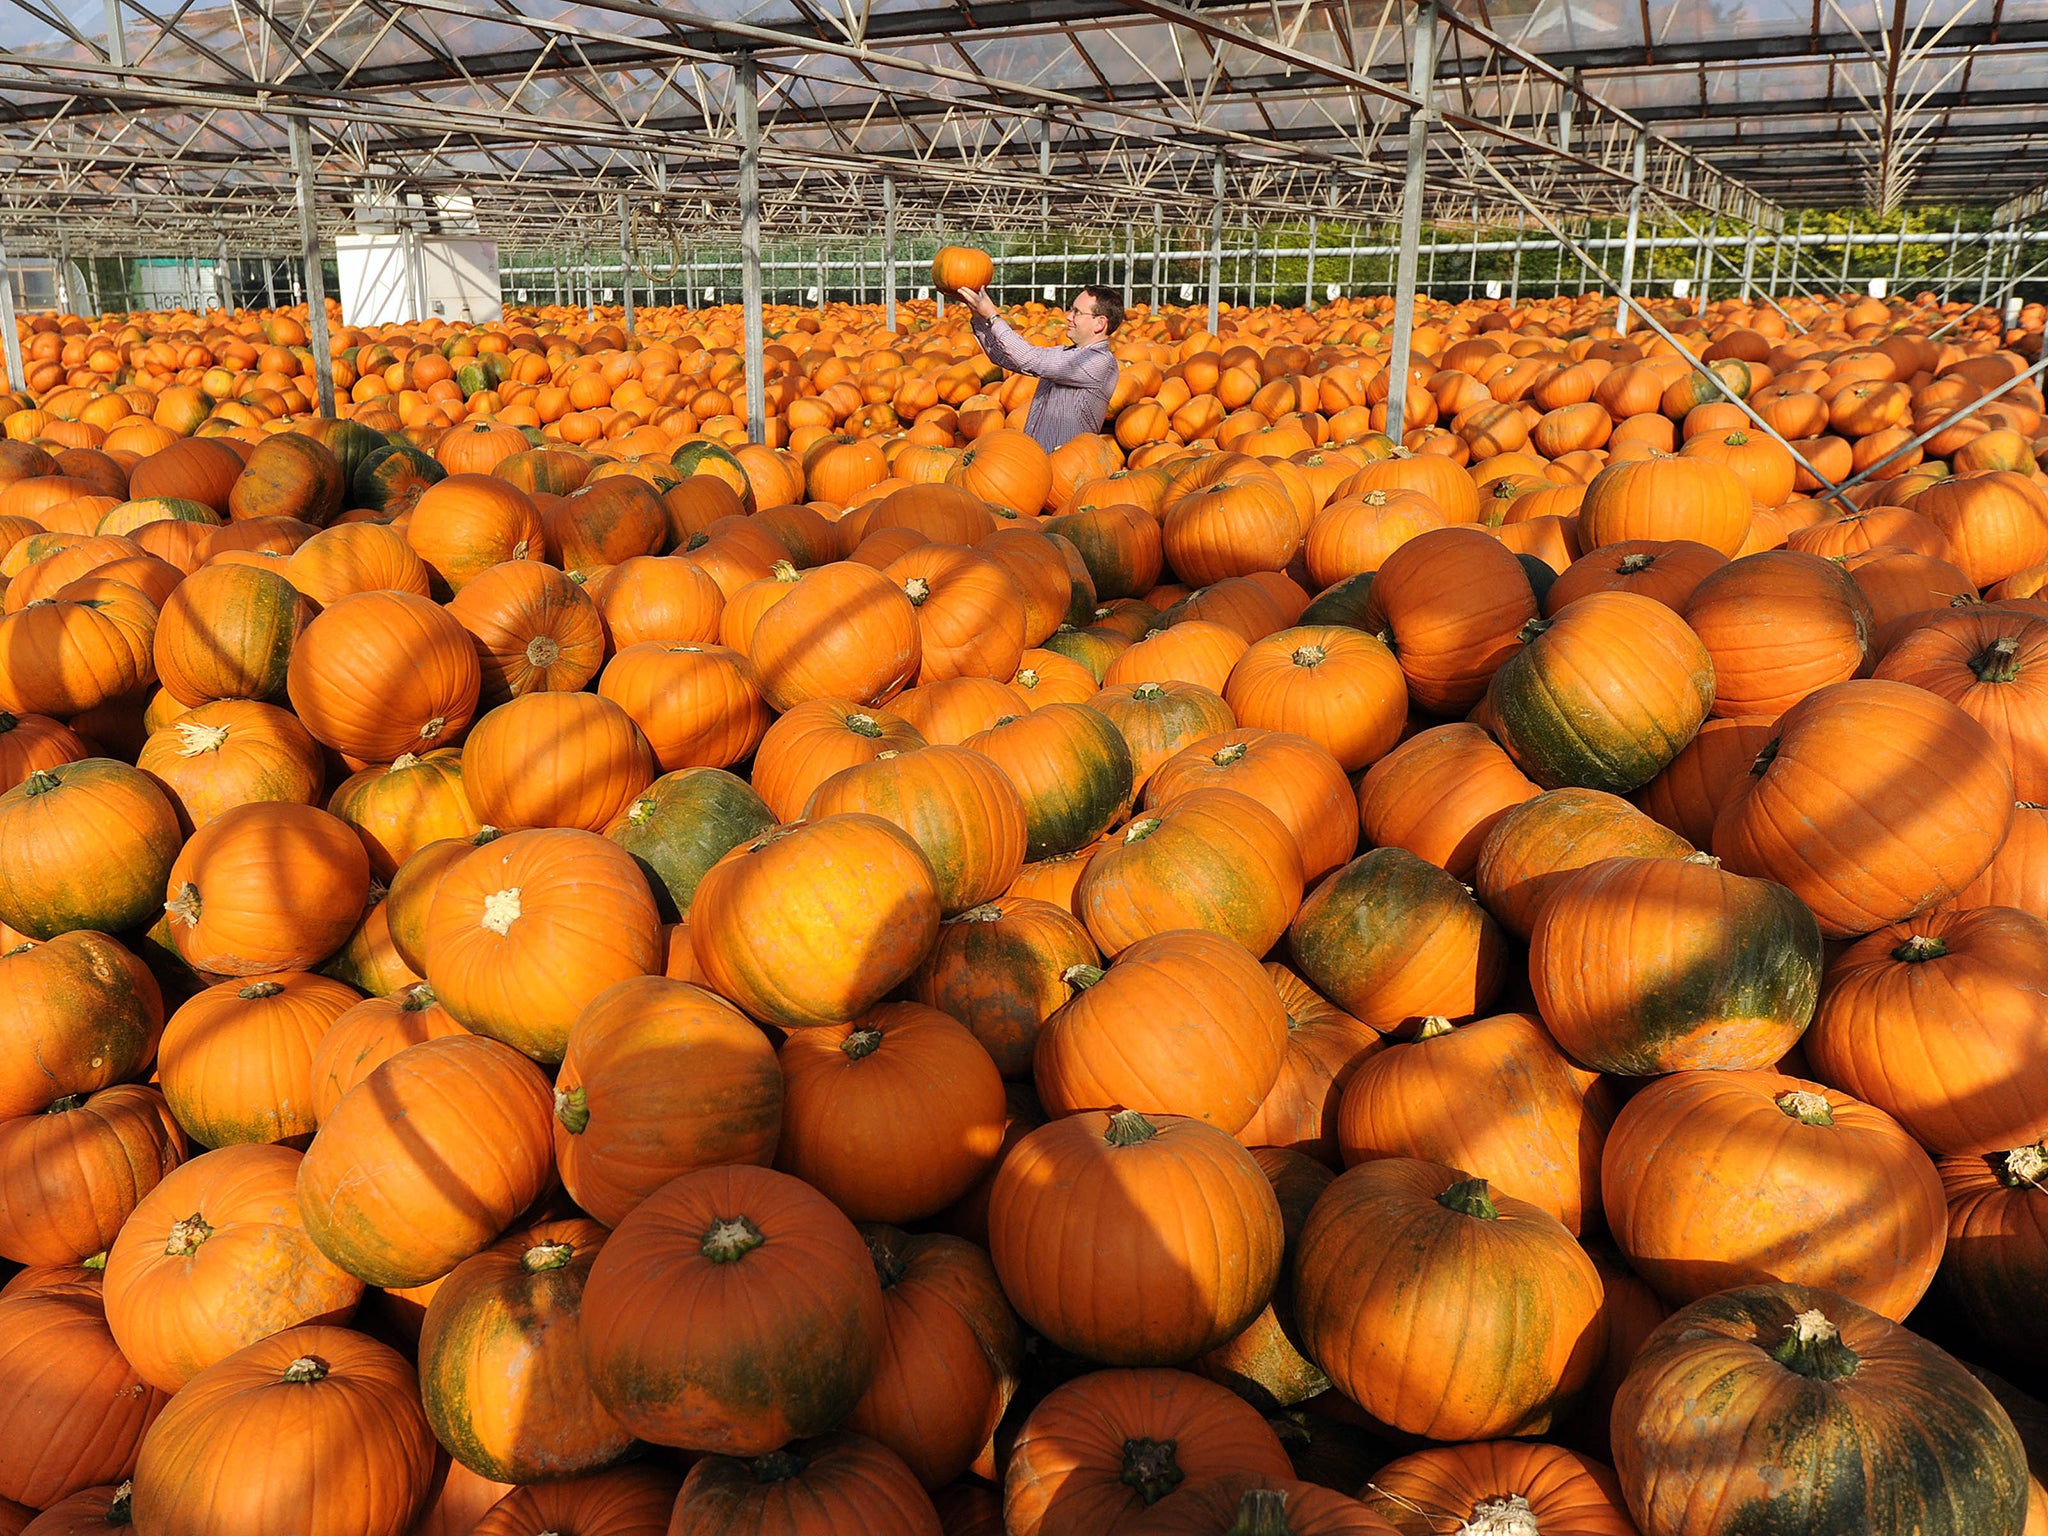 Pumpkins at Oakley Farms in Wisbech, Cambridgeshire, which have been harvested for Sainsbury's in-store Halloween activity. Following a hot summer and an unusually mild September, the pumpkins were picked earlier than usual. This has resulted in a bumper 